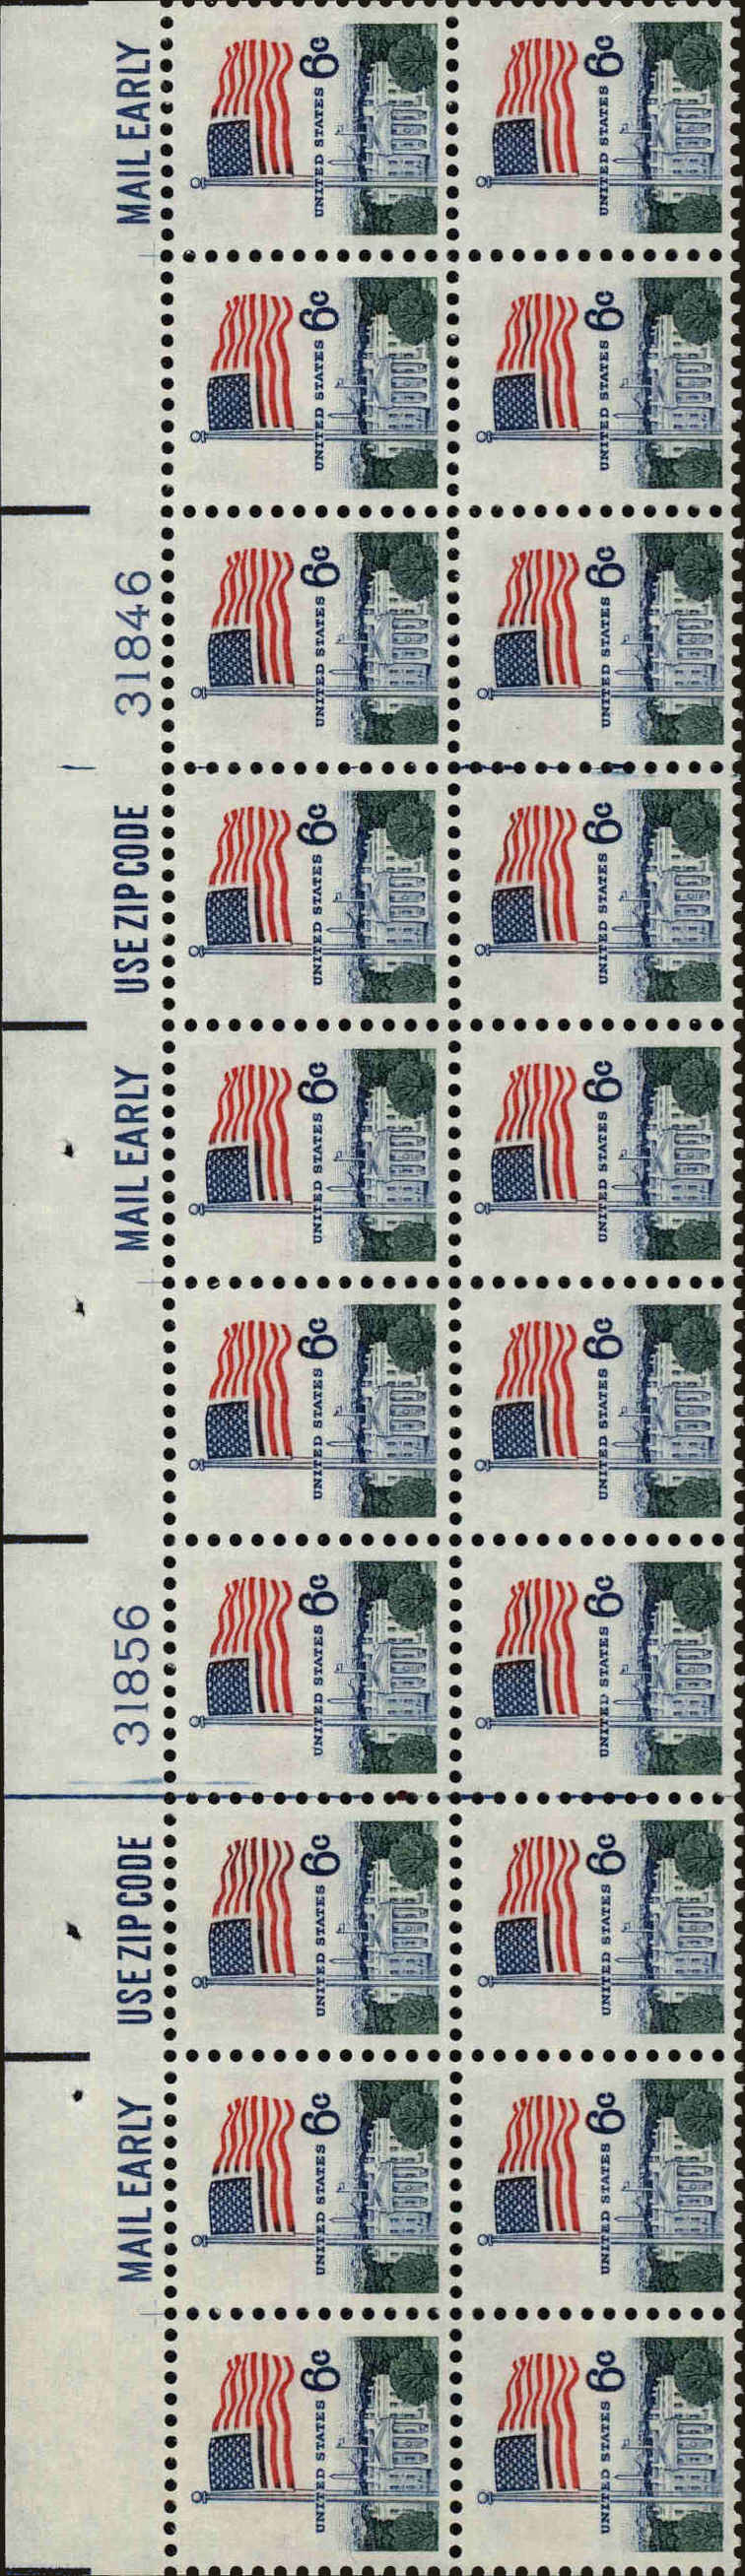 Front view of United States 1338D collectors stamp